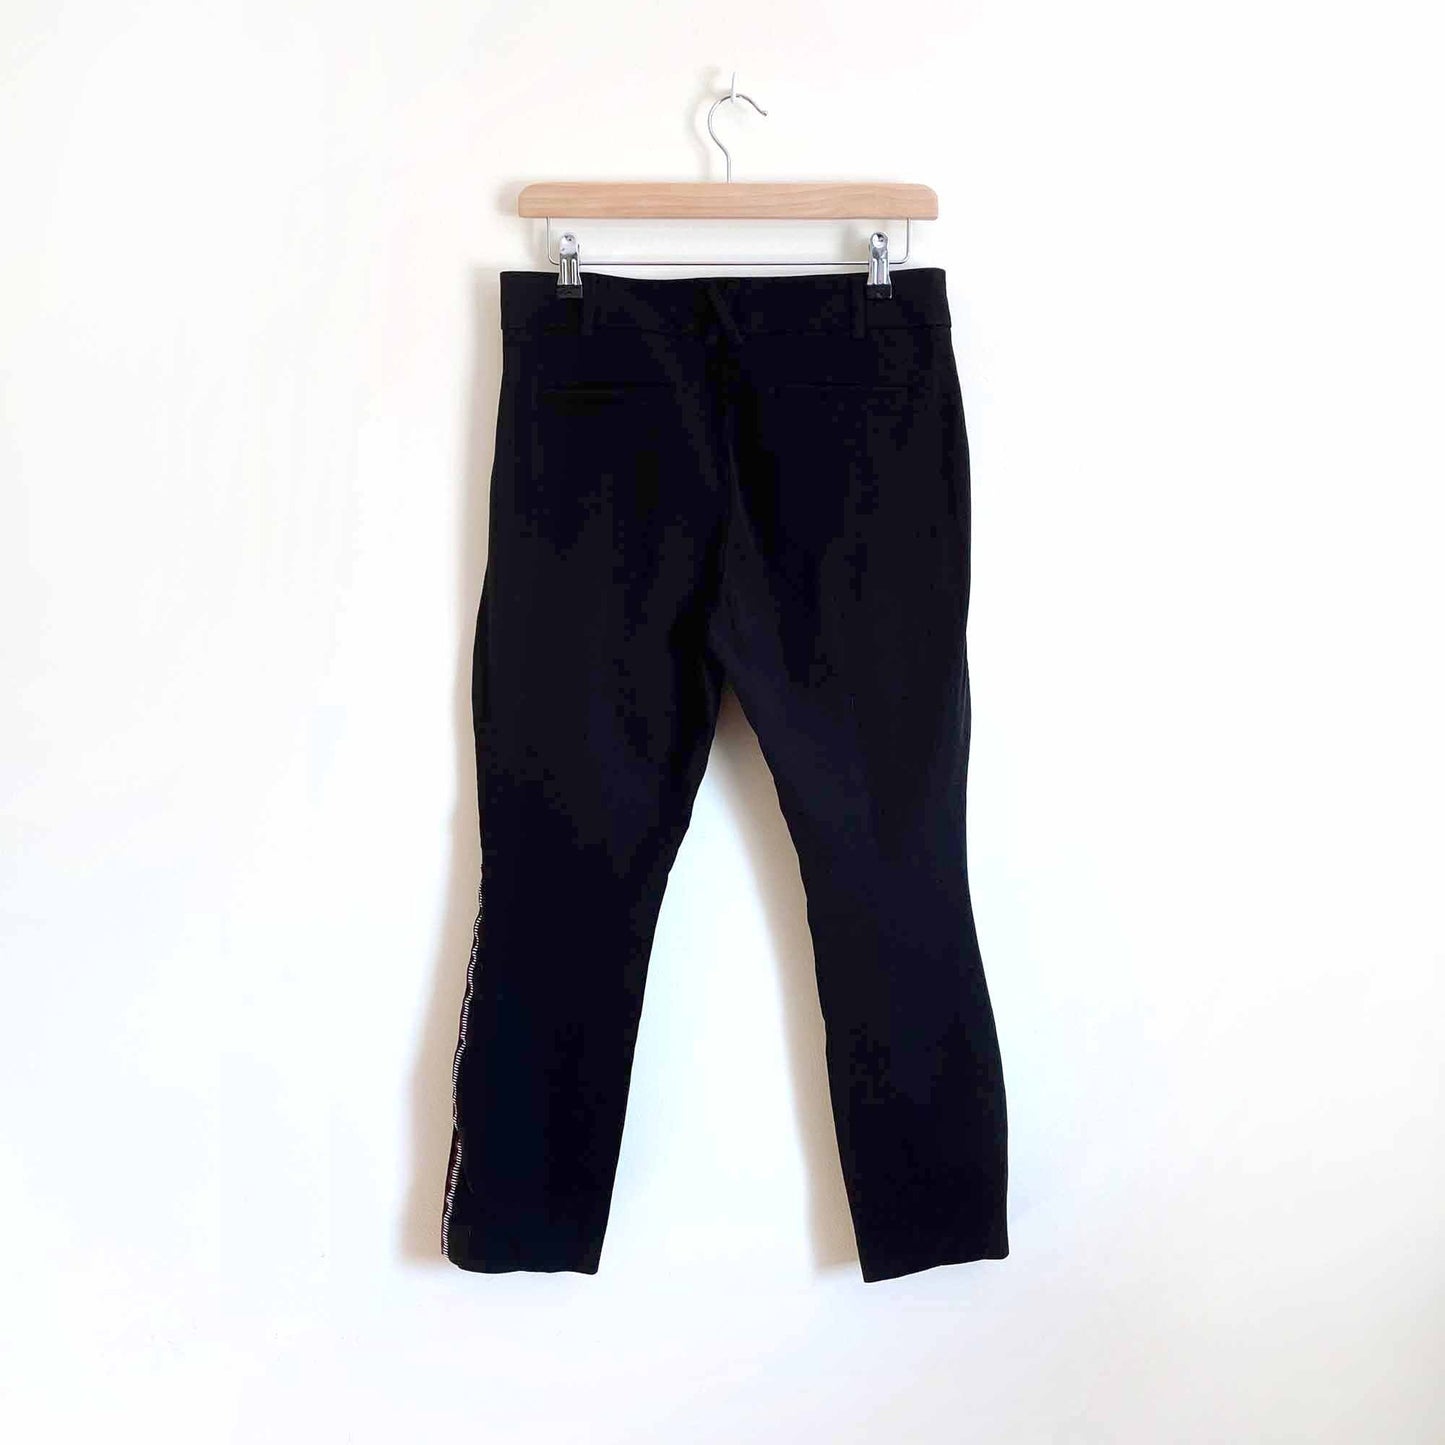 Anthropologie the Essential Slim high rise trouser  - size 8